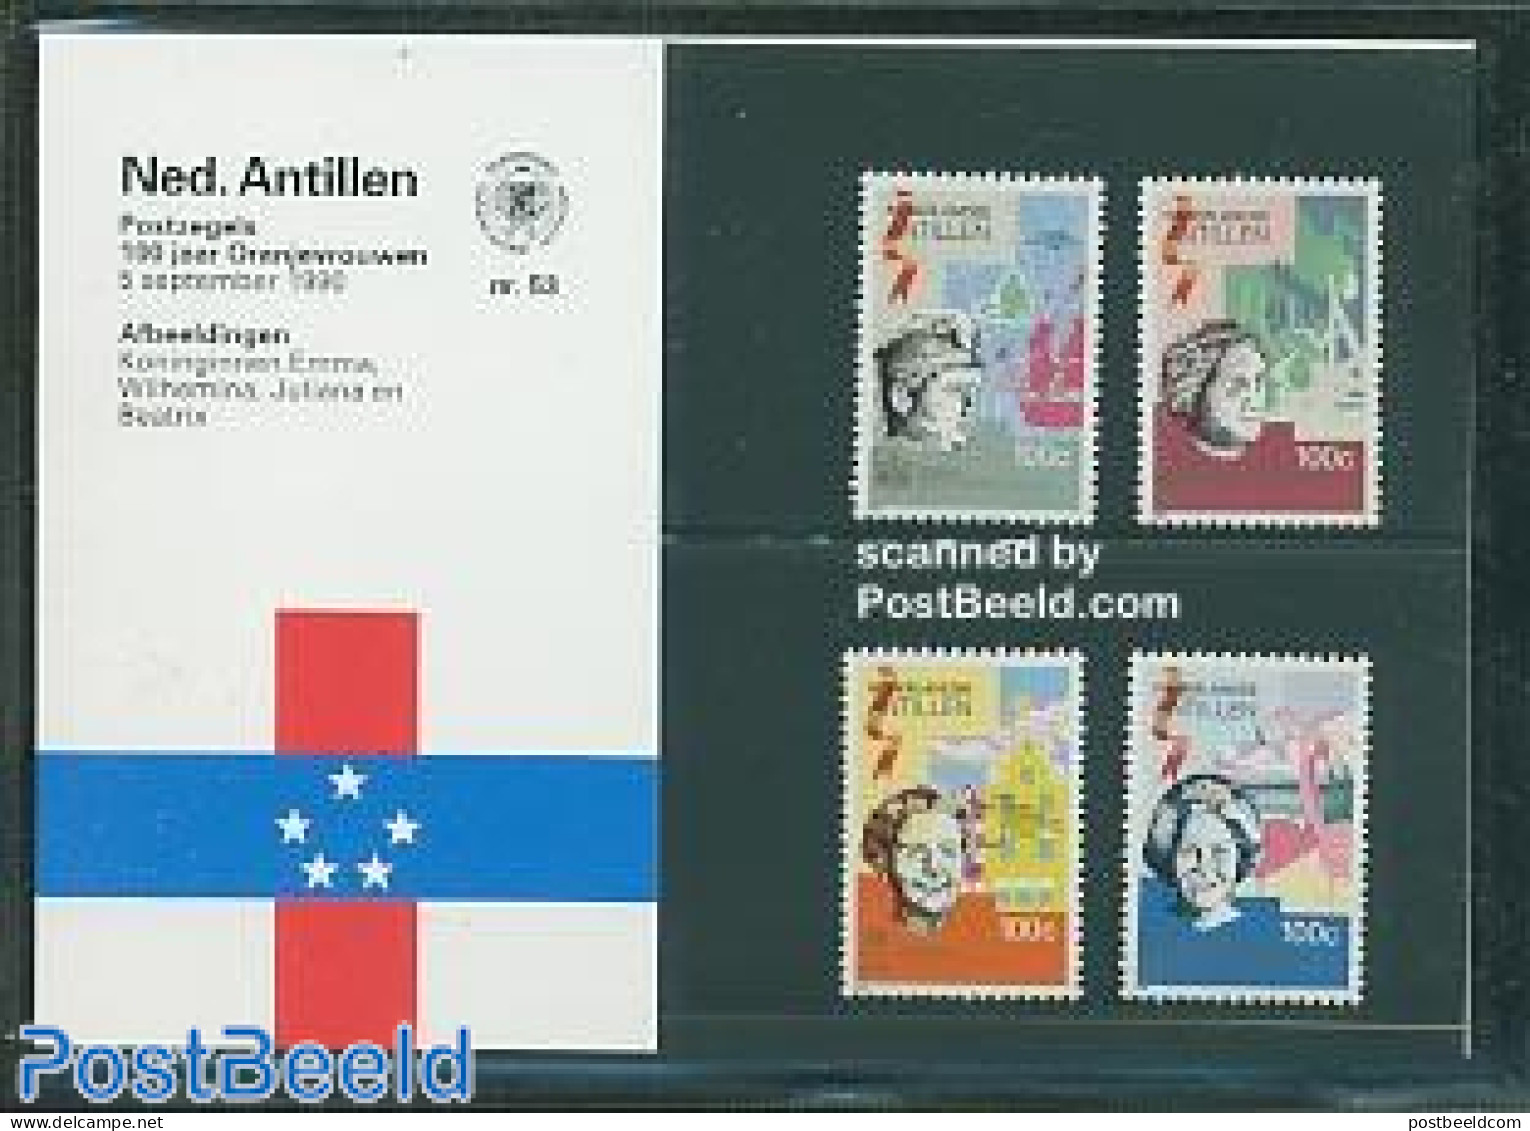 Netherlands Antilles 1990 Four Queens Presentation Pack 53, Mint NH, History - Various - Kings & Queens (Royalty) - Maps - Familles Royales